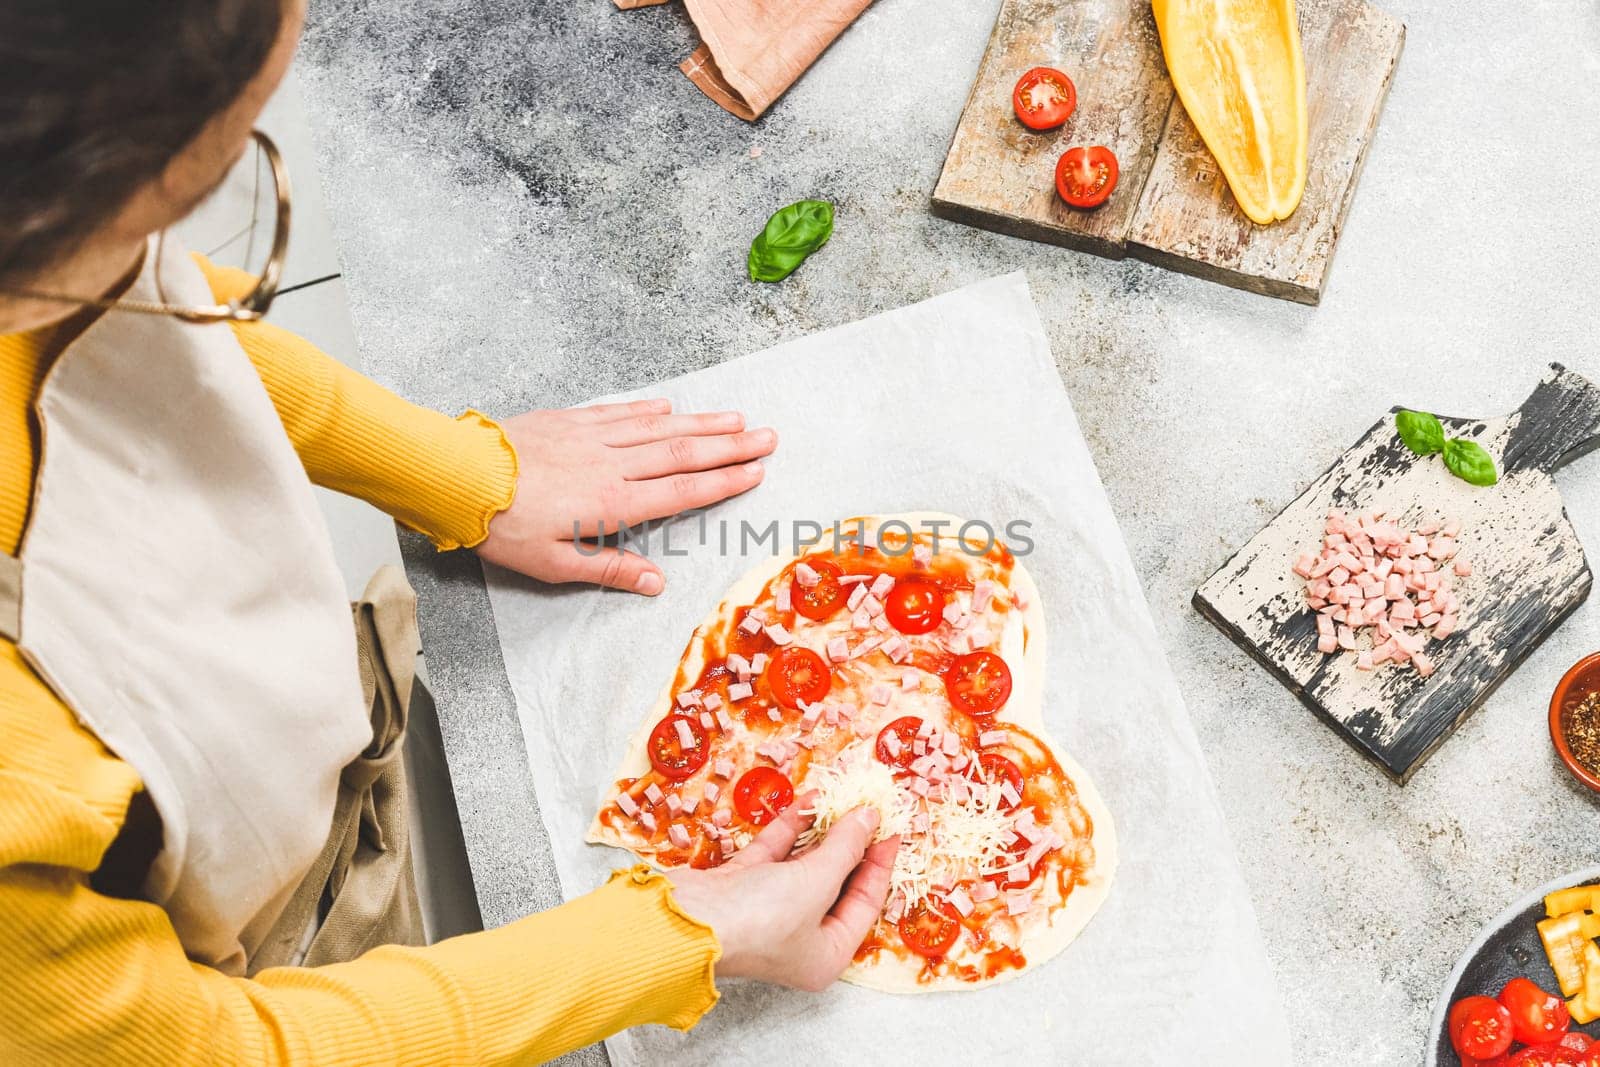 Caucasian teenage girl in an apron pouring grated cheese on pizza hearts for valentine's day with ingredients on the table, close-up side view. Concept of cooking pizza for valentine's day.